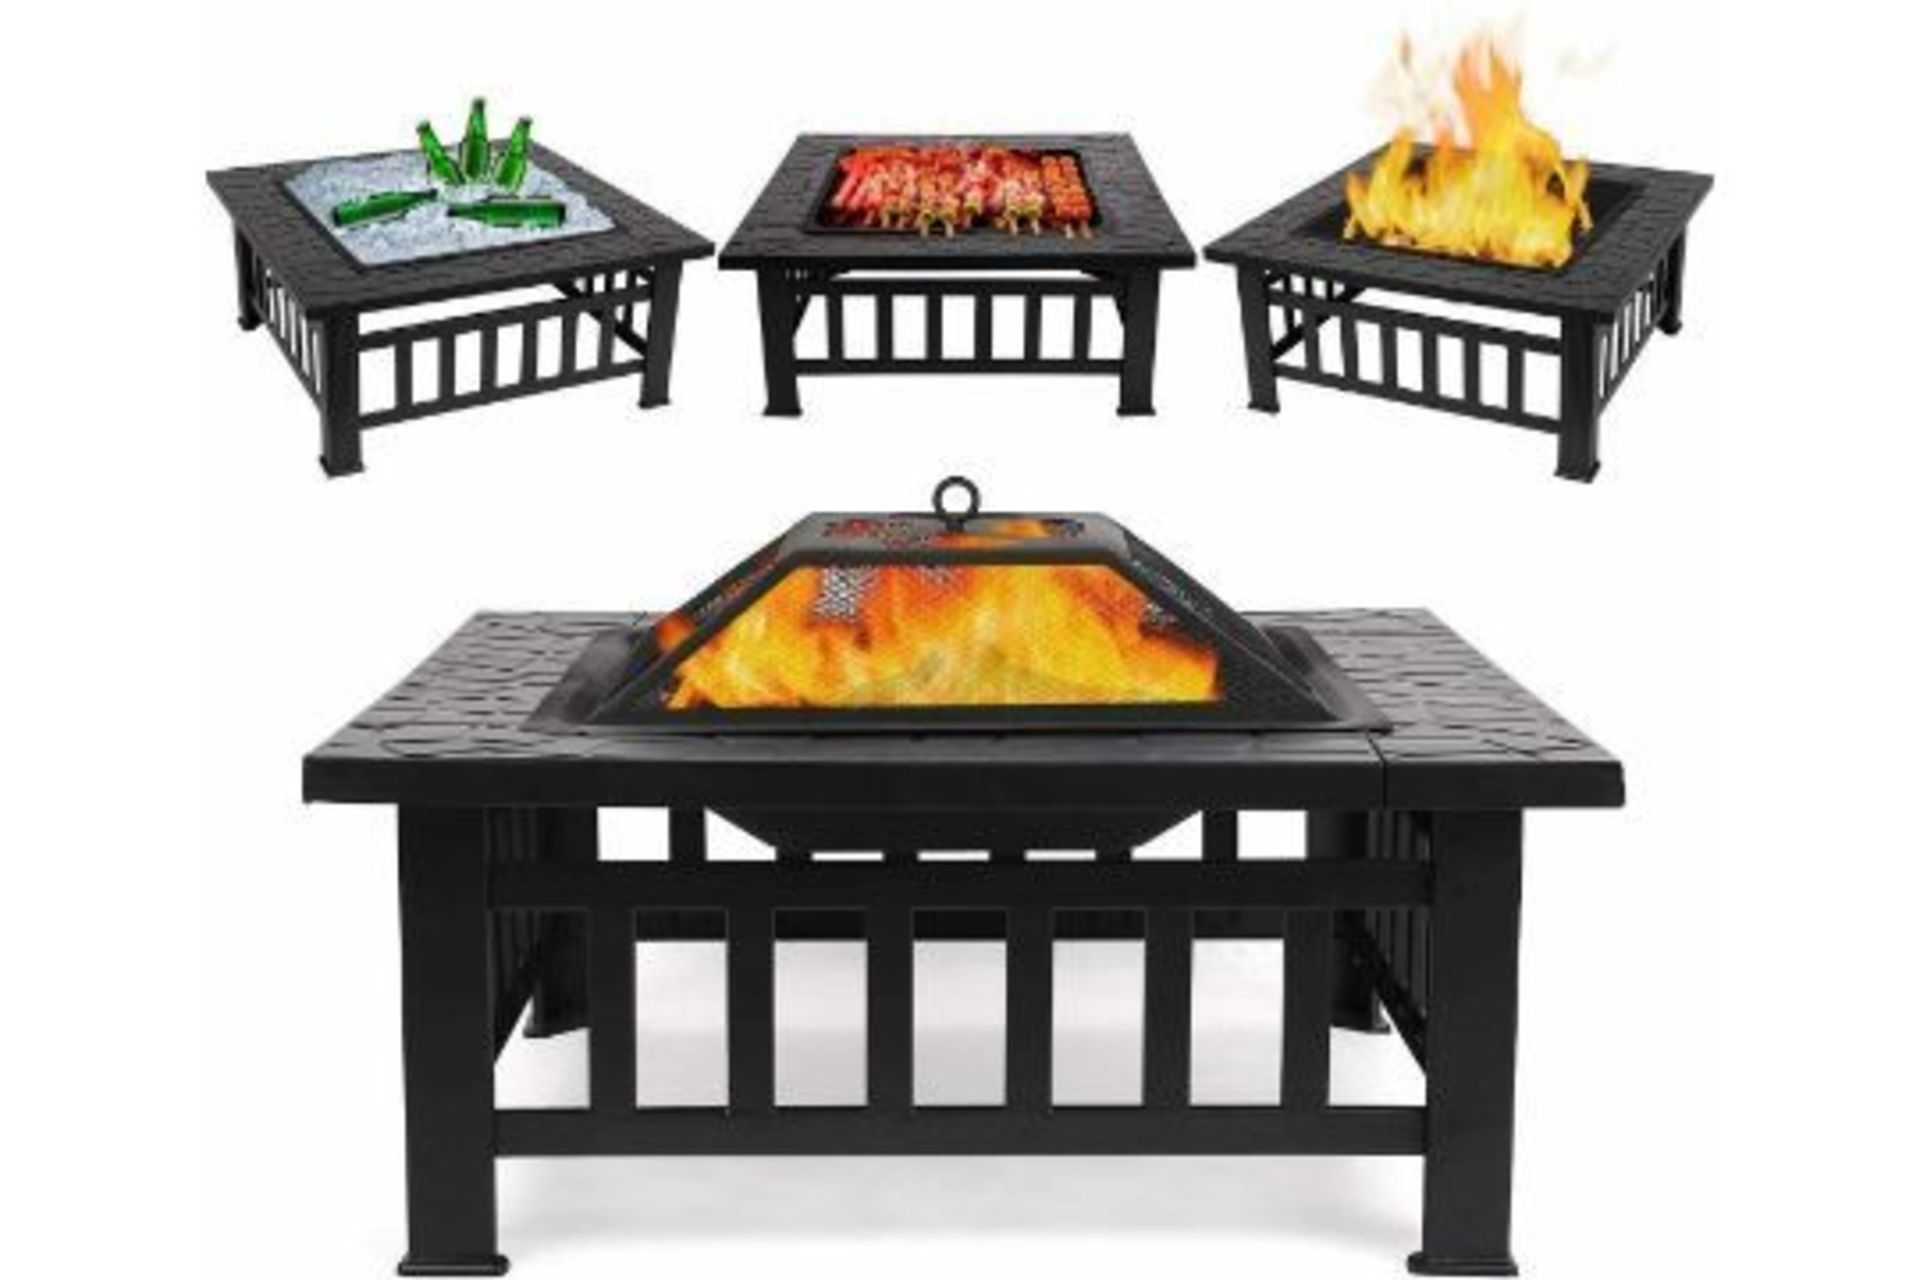 New Boxed Outdoor 3 in 1 BBQ, Large Firepit, Ice Bucket & Garden Square Table. RRP £249.99. Planning